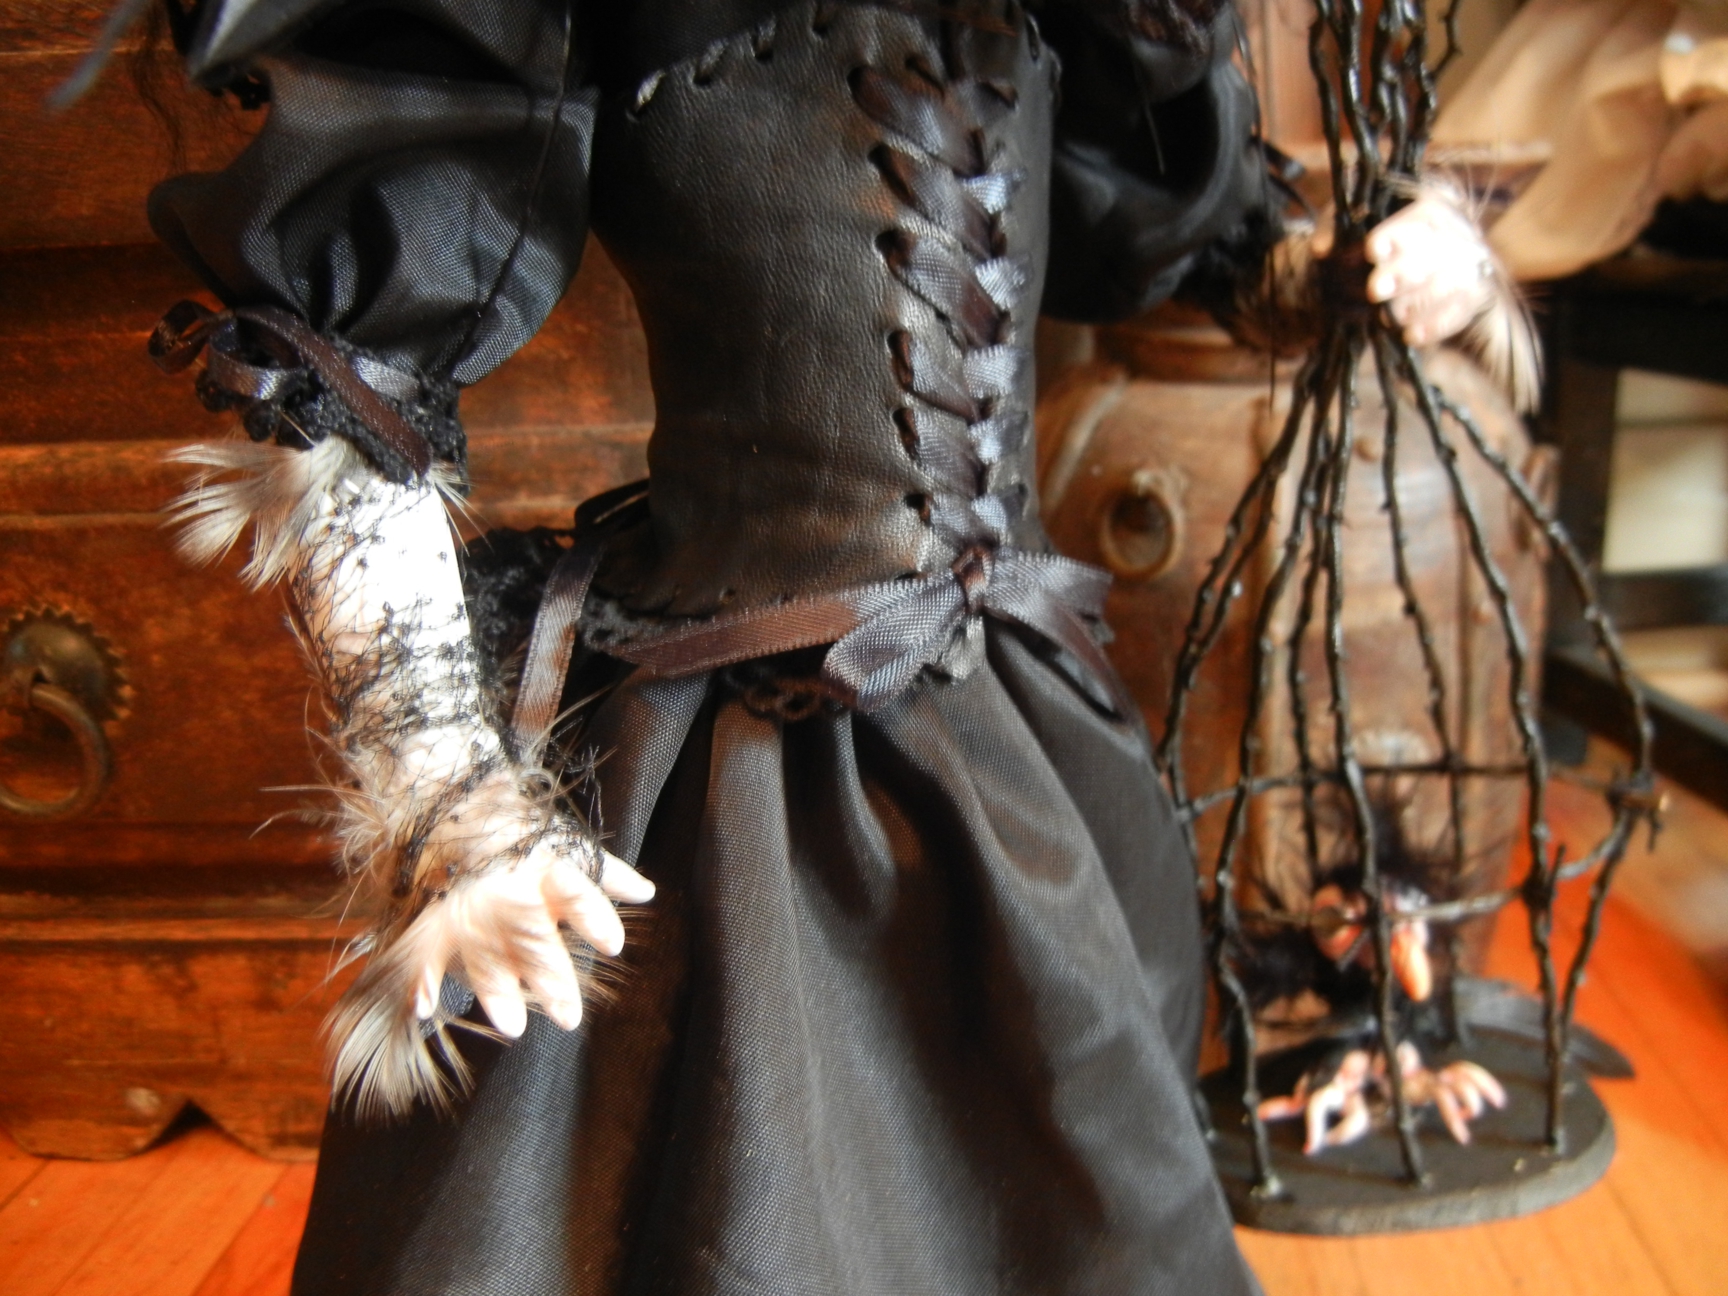 gothic doll torso wearing black corset dress and holding a pet bird in a handmade thorn birdcage